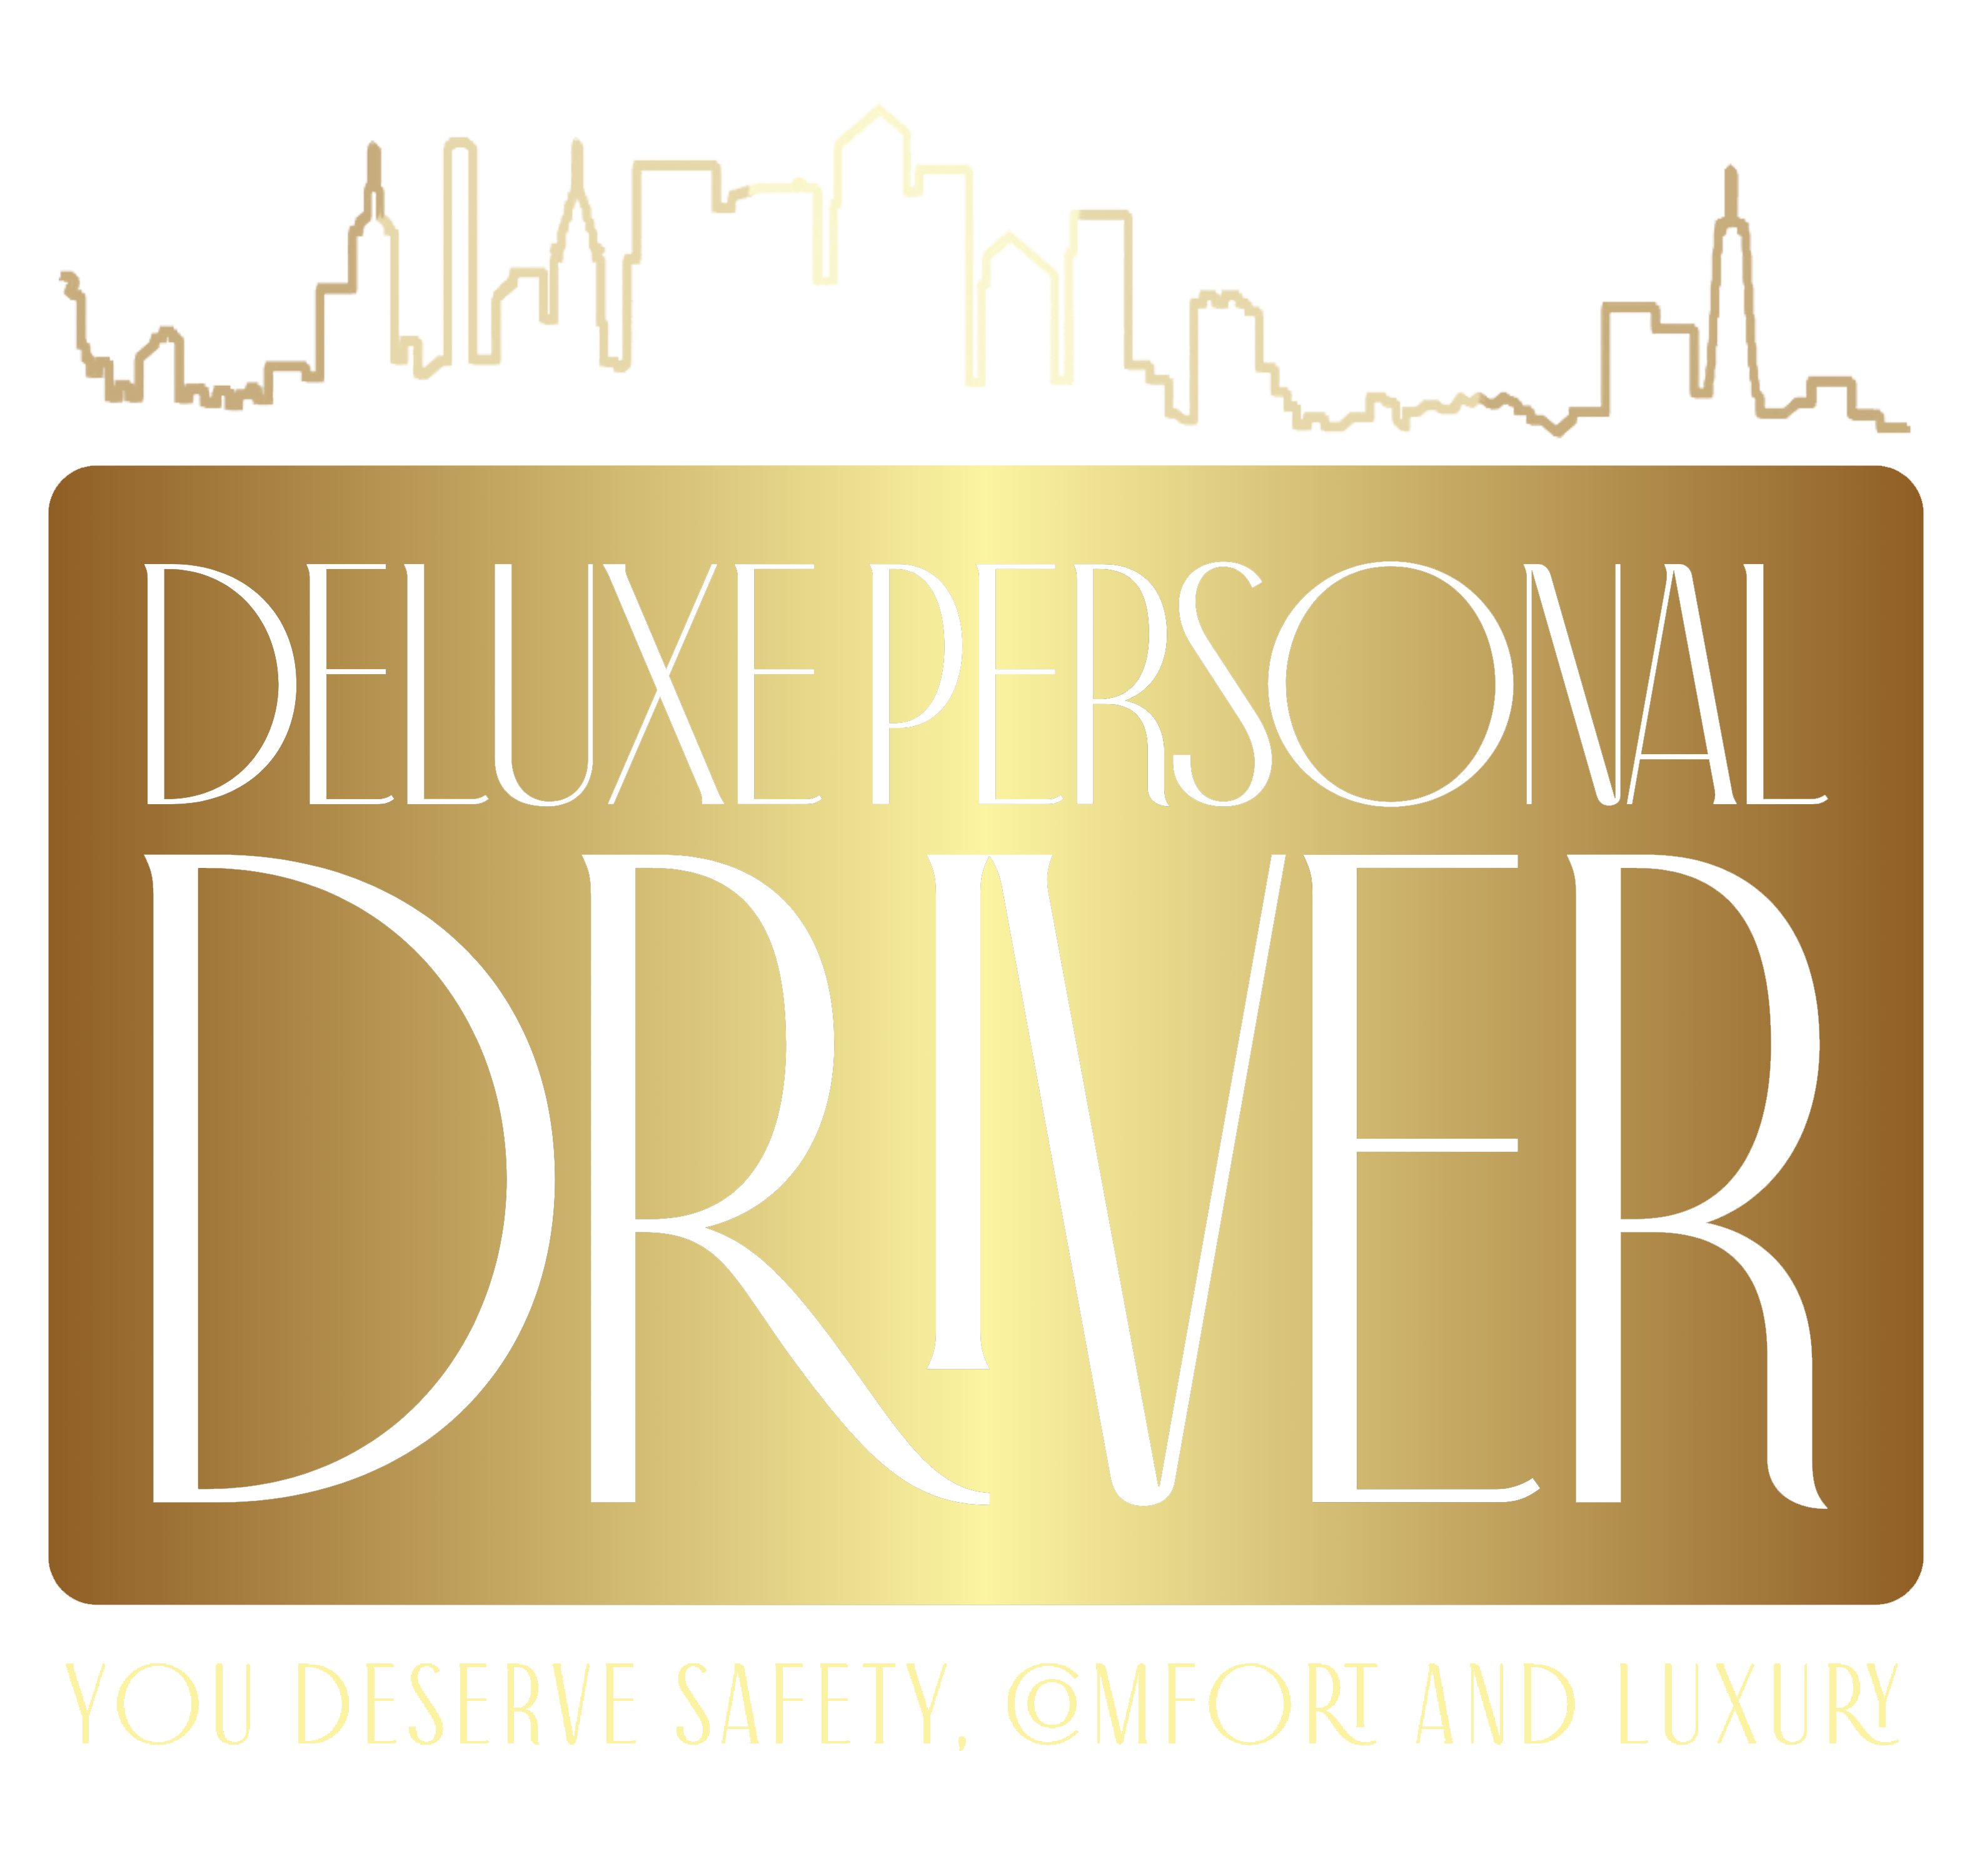 Deluxe Personal Driver